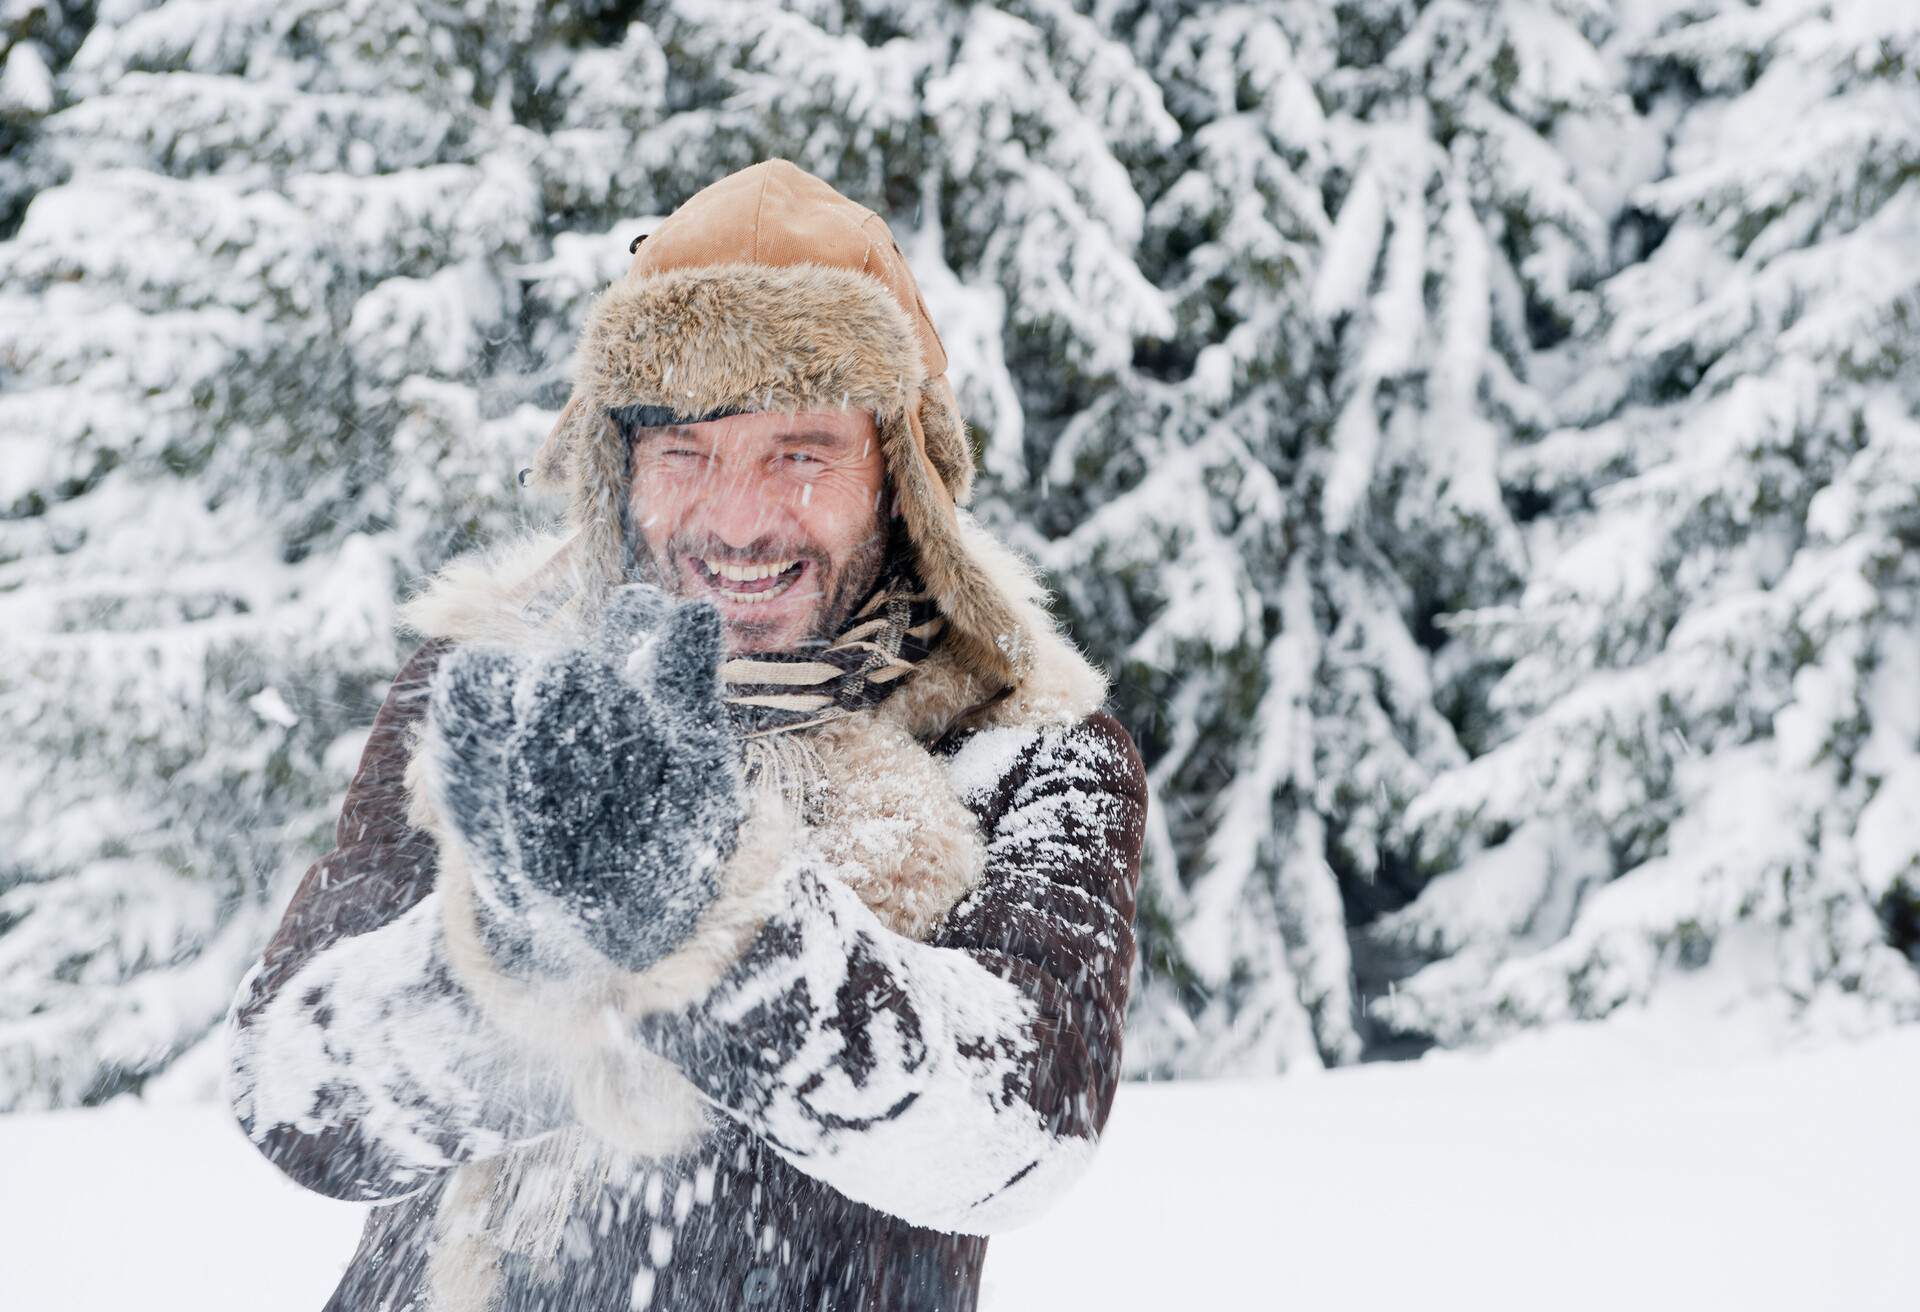 A man in winter clothes happily playing in the snow.